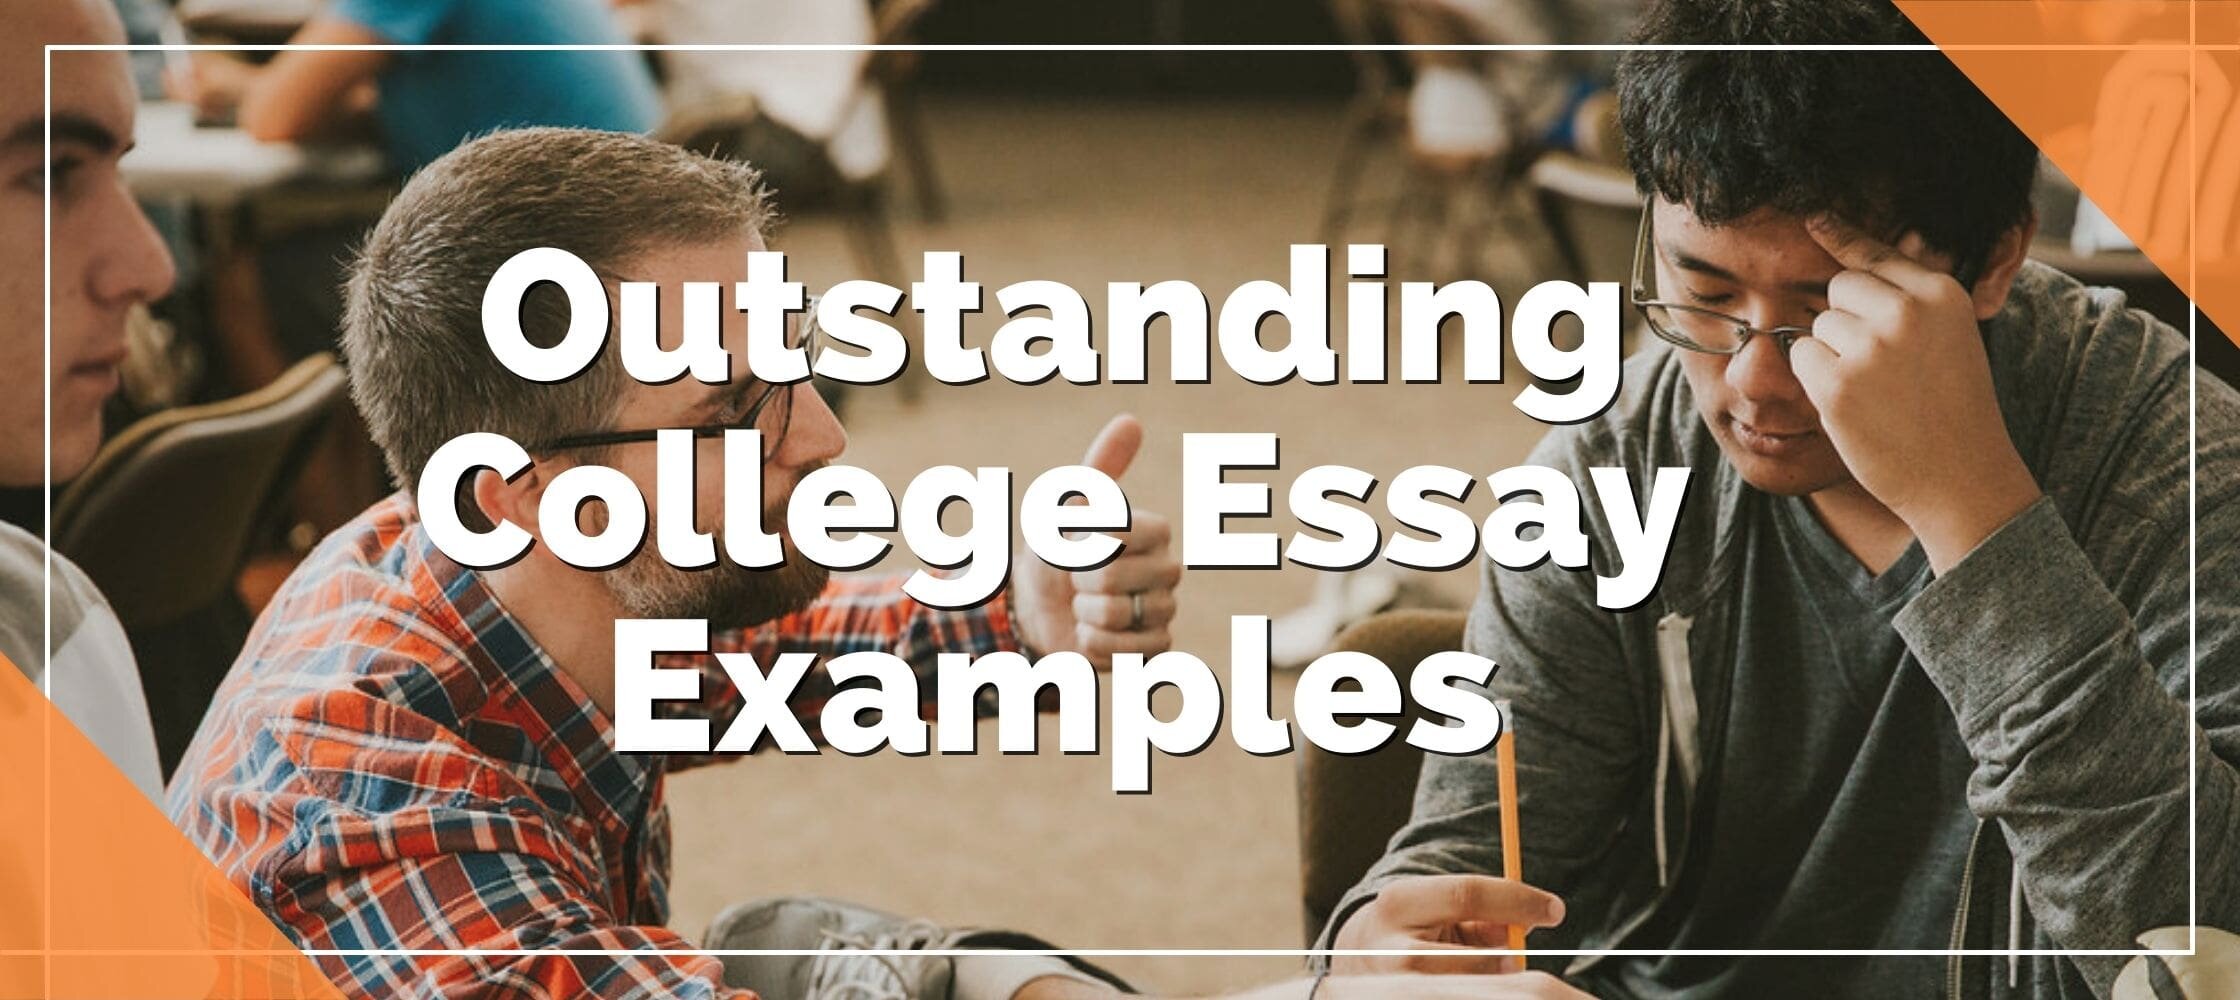 How to Write an Essay - Essay Examples